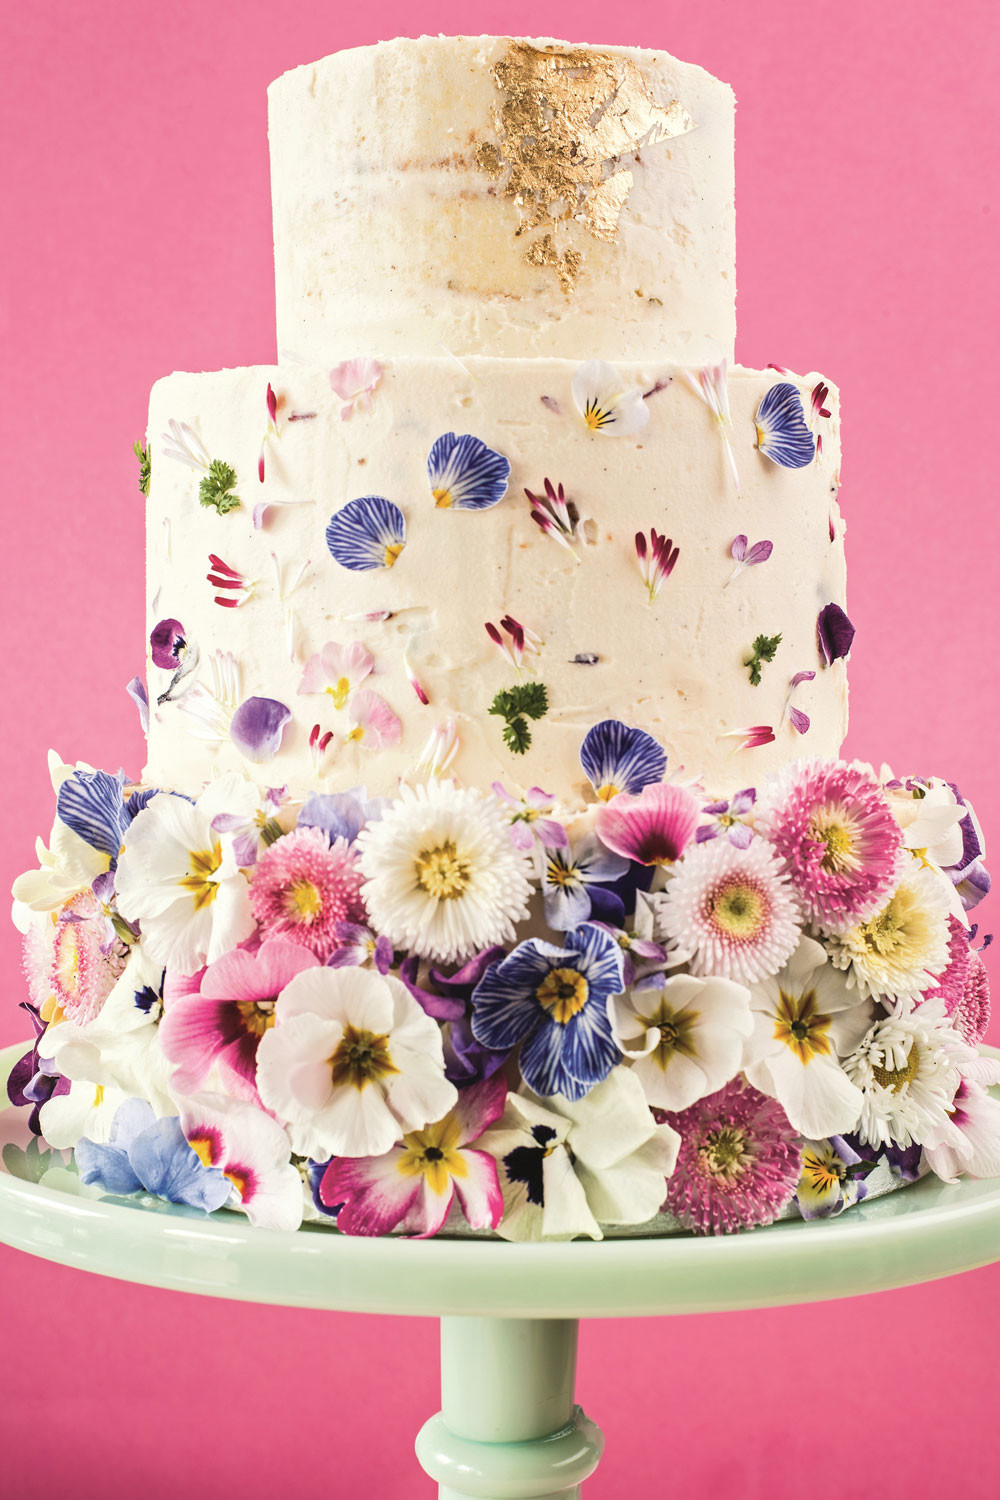 How To Decorate Wedding Cakes
 How To Decorate A Wedding Celebration Cake With Edible